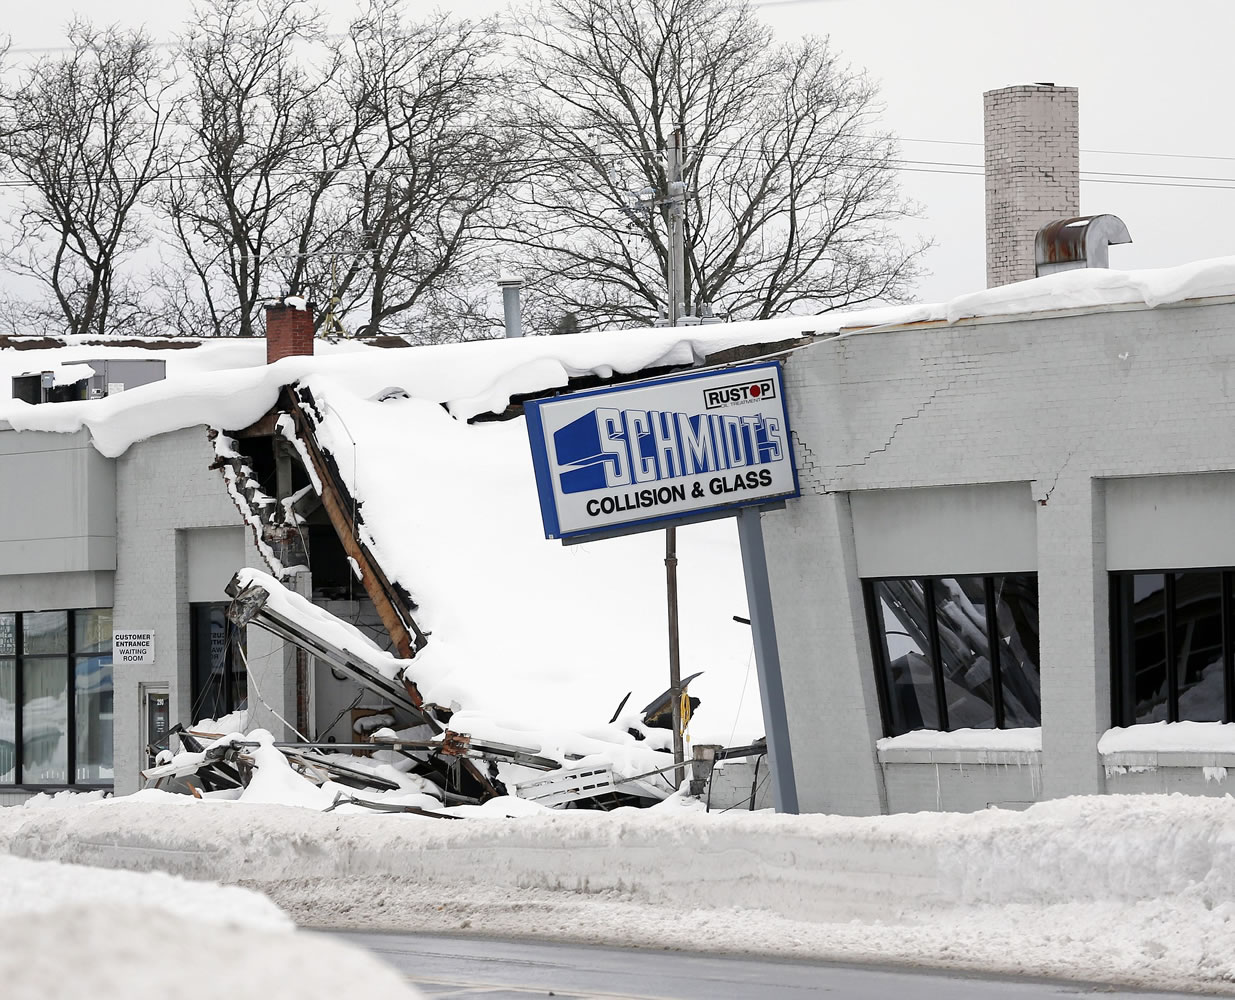 The roof at Schmidt's Collision and Glass in Hamburg, N.Y., shown Saturday, collapsed after taking on heavy snow during this week's lake-effect snowstorms.